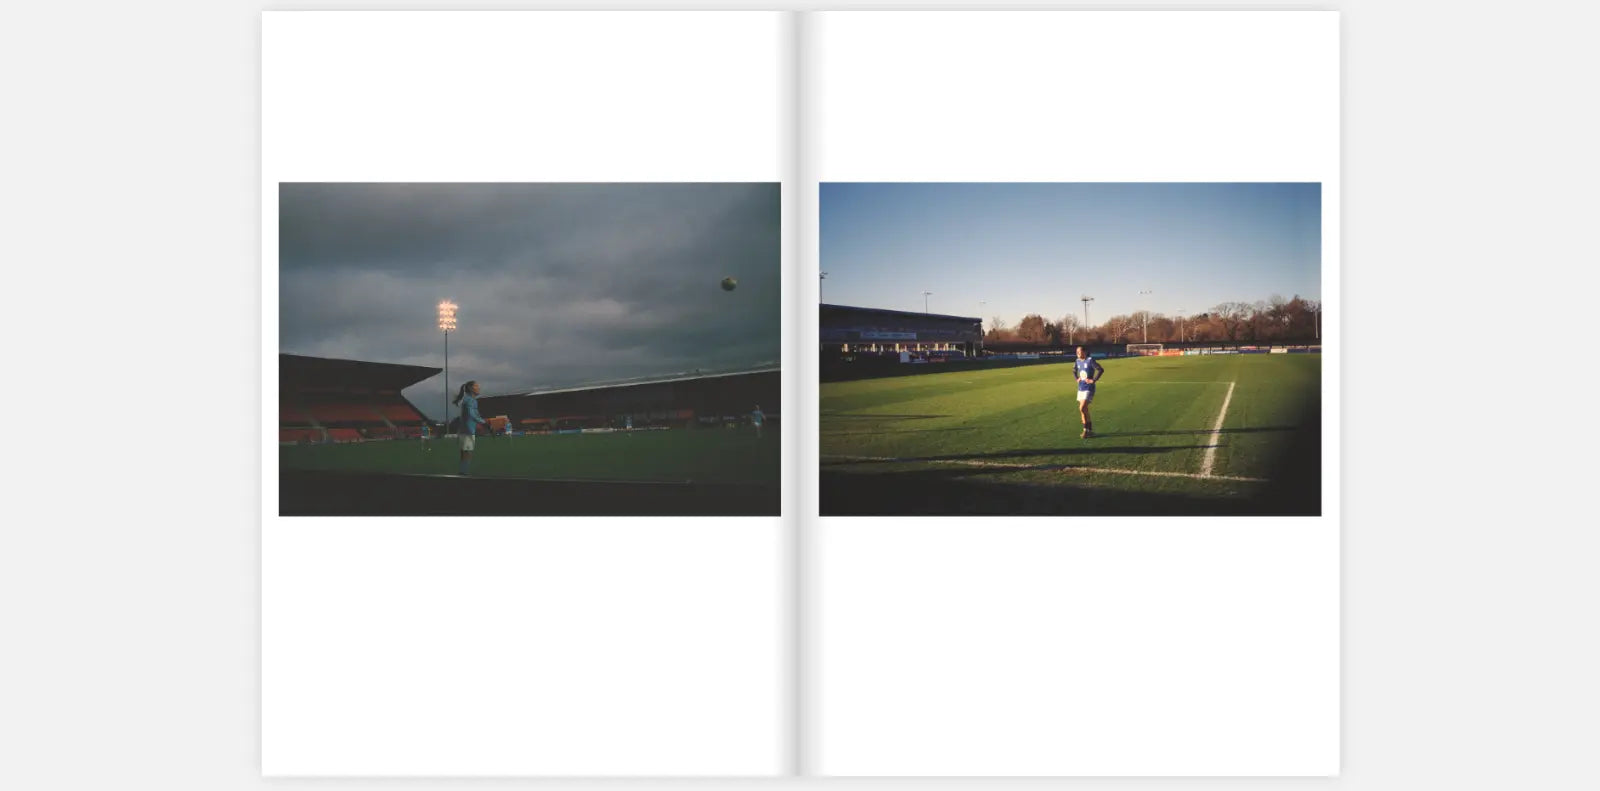 Two-page spread from the zine "The Women's Game" by Claire Wray. The left page shows a football player in a blue jersey preparing to throw in the ball during an evening match, with stadium lights illuminating the field and dark clouds overhead. The right page features a football player in a blue and white jersey standing on the field during a daytime match, with the sun casting long shadows and a clear sky in the background.